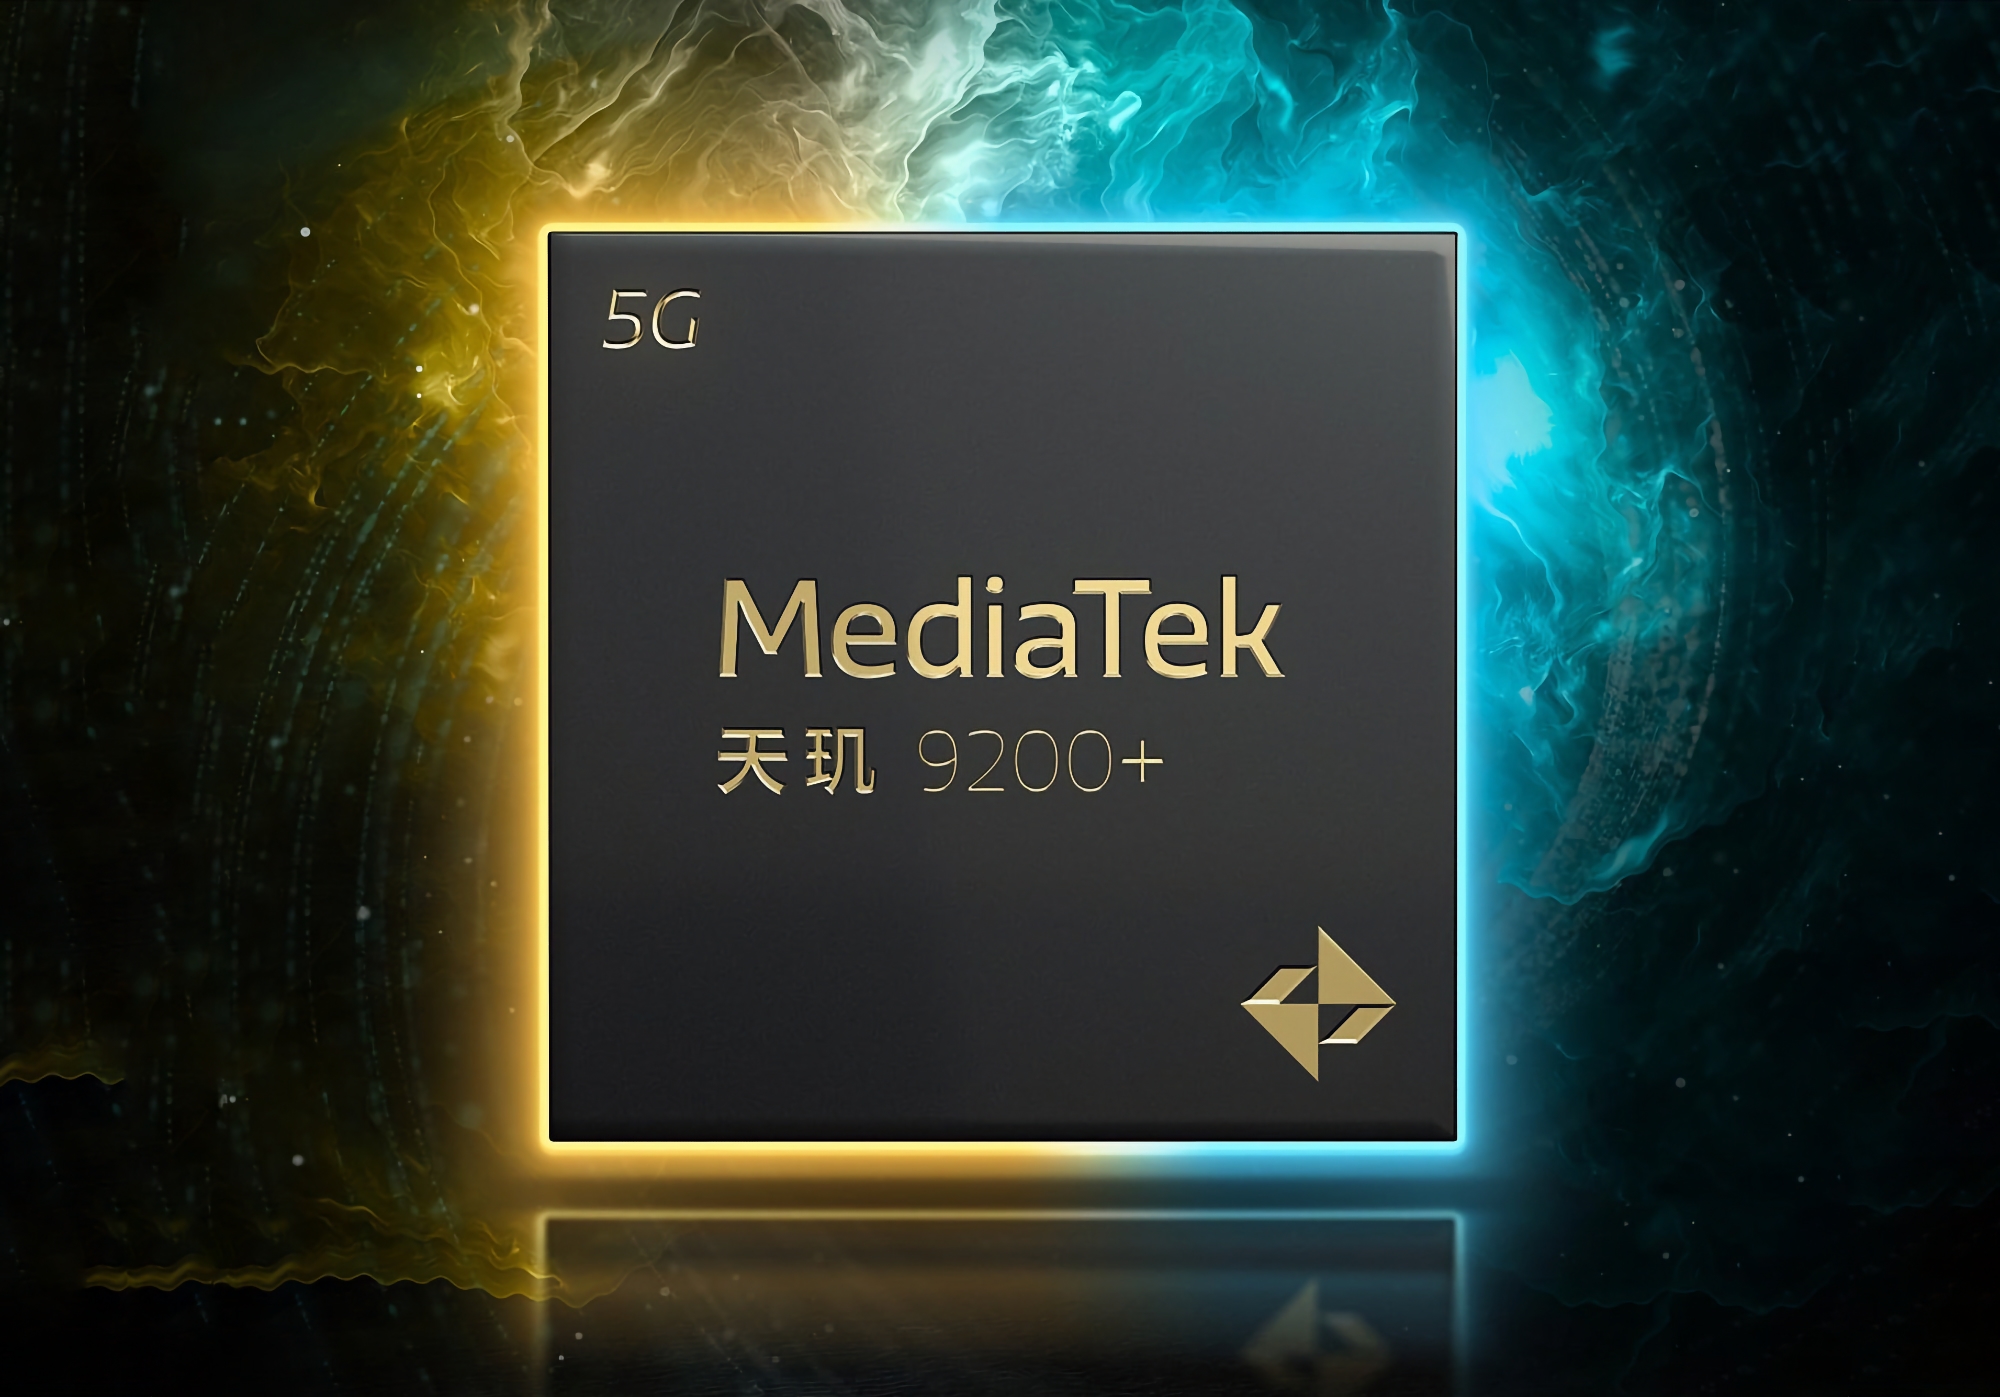 It's official: MediaTek to unveil new flagship Dimensity 9200+ processor on May 10